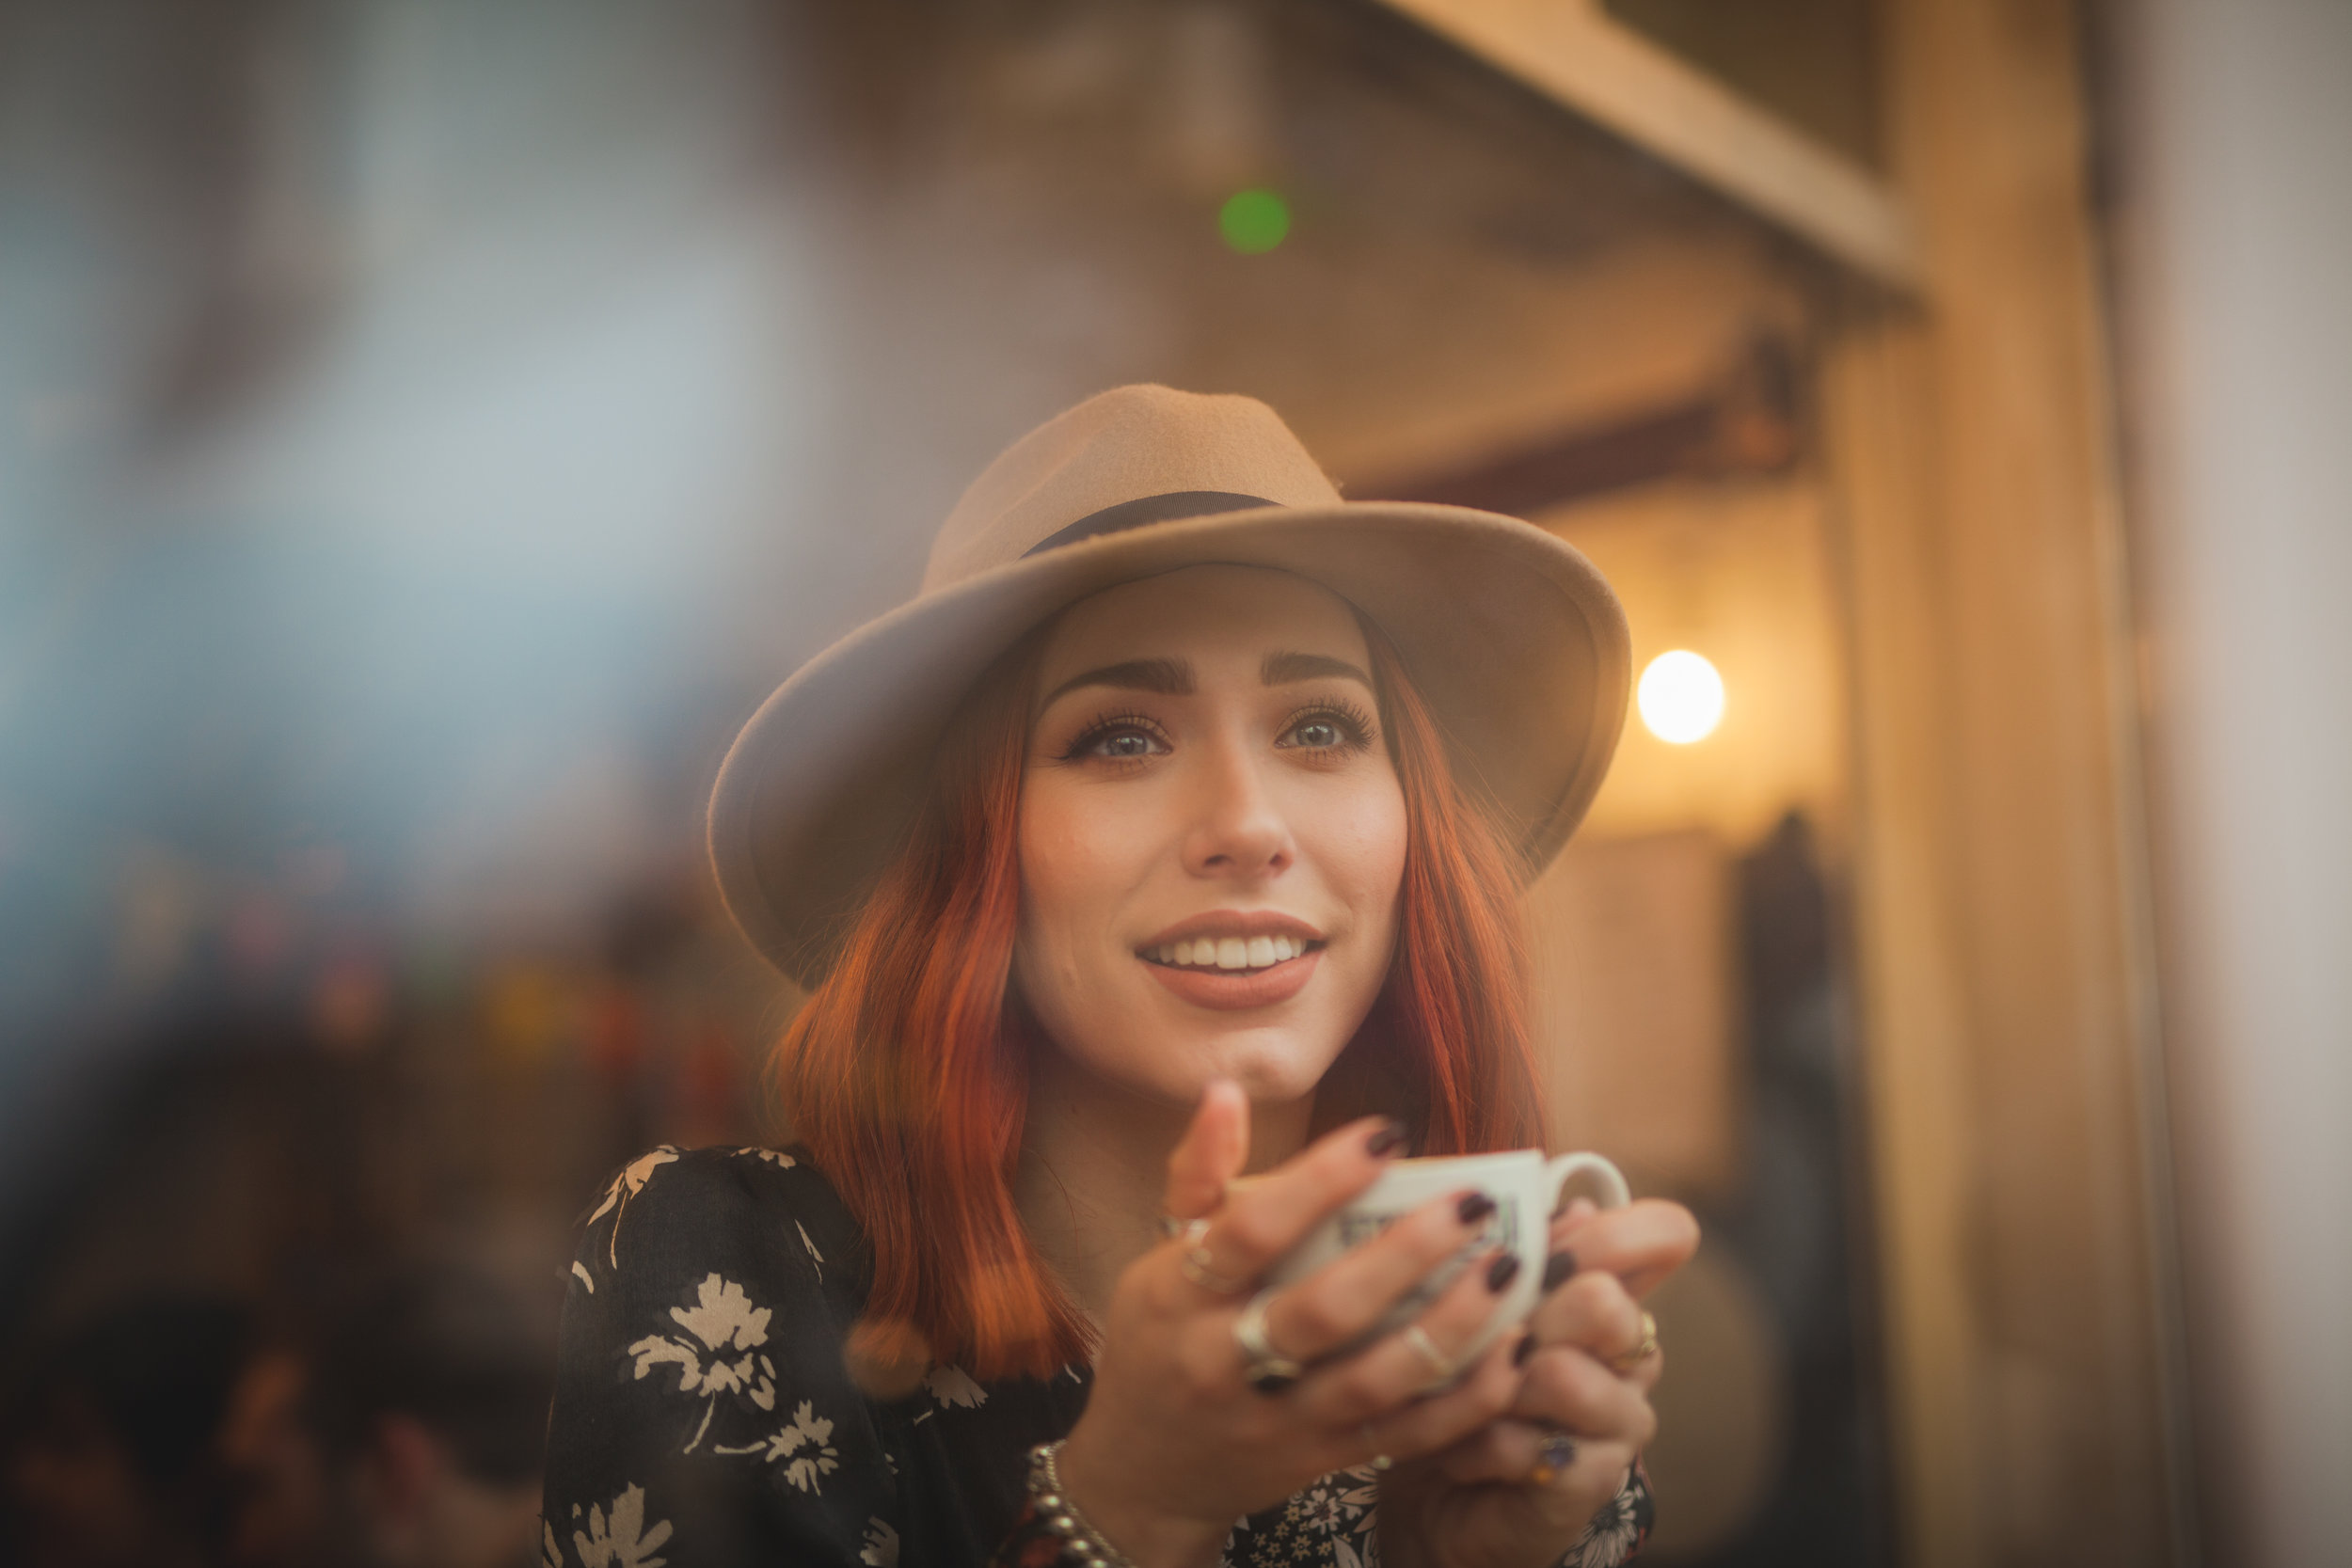 Red head model poses for a photoshoot looking through a window holding a coffee